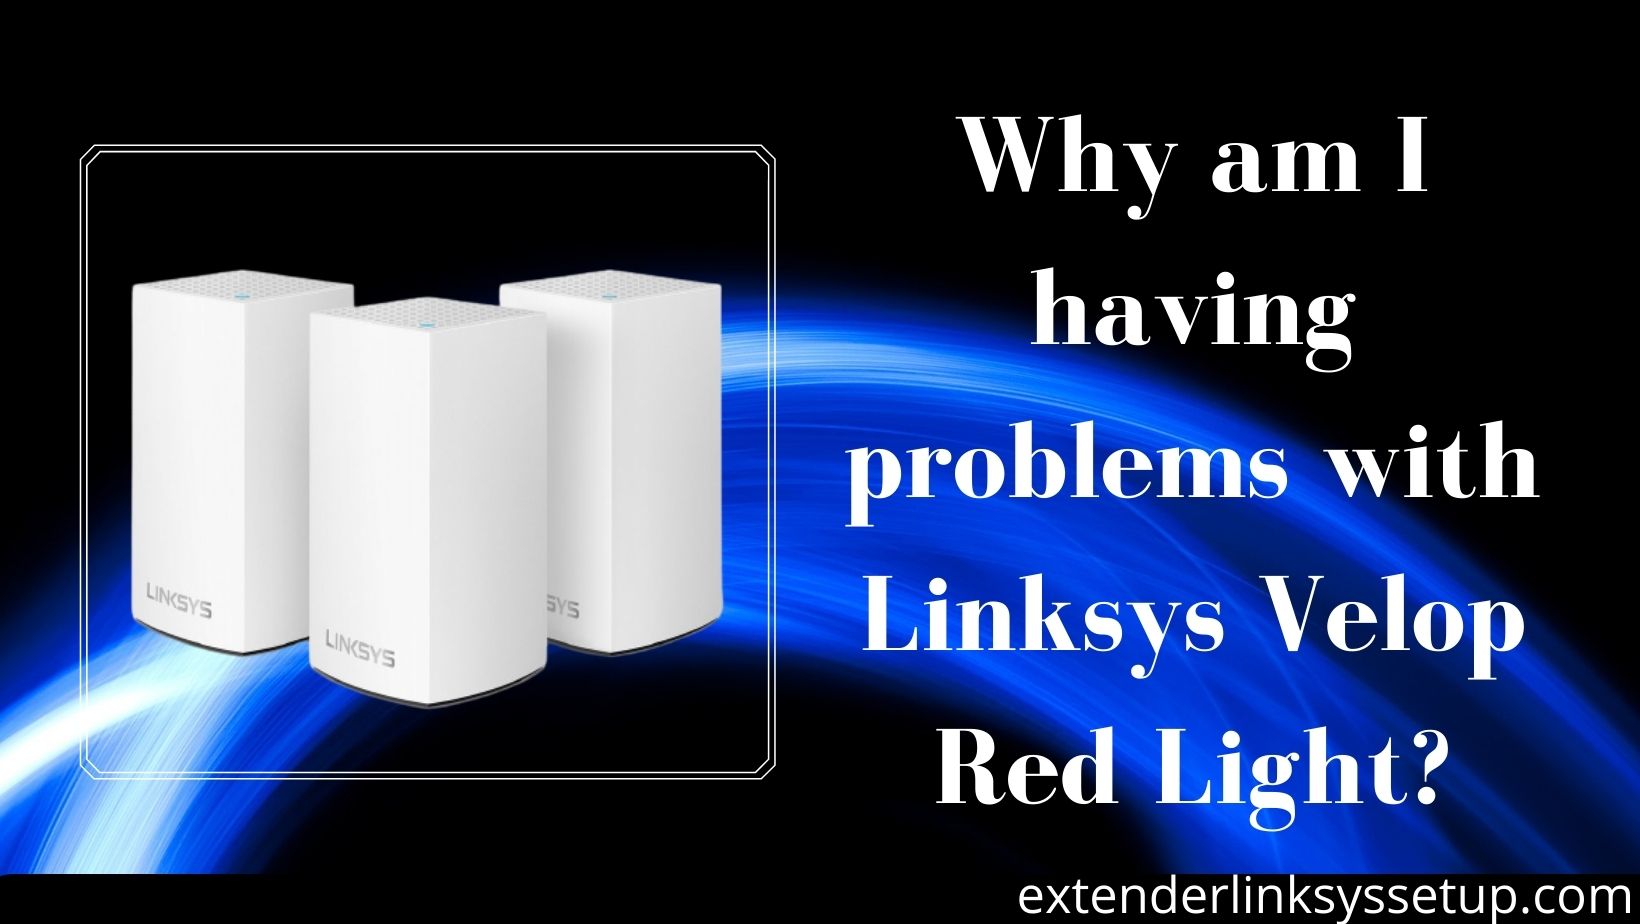 Why am I having problems with Linksys Velop Red Light?